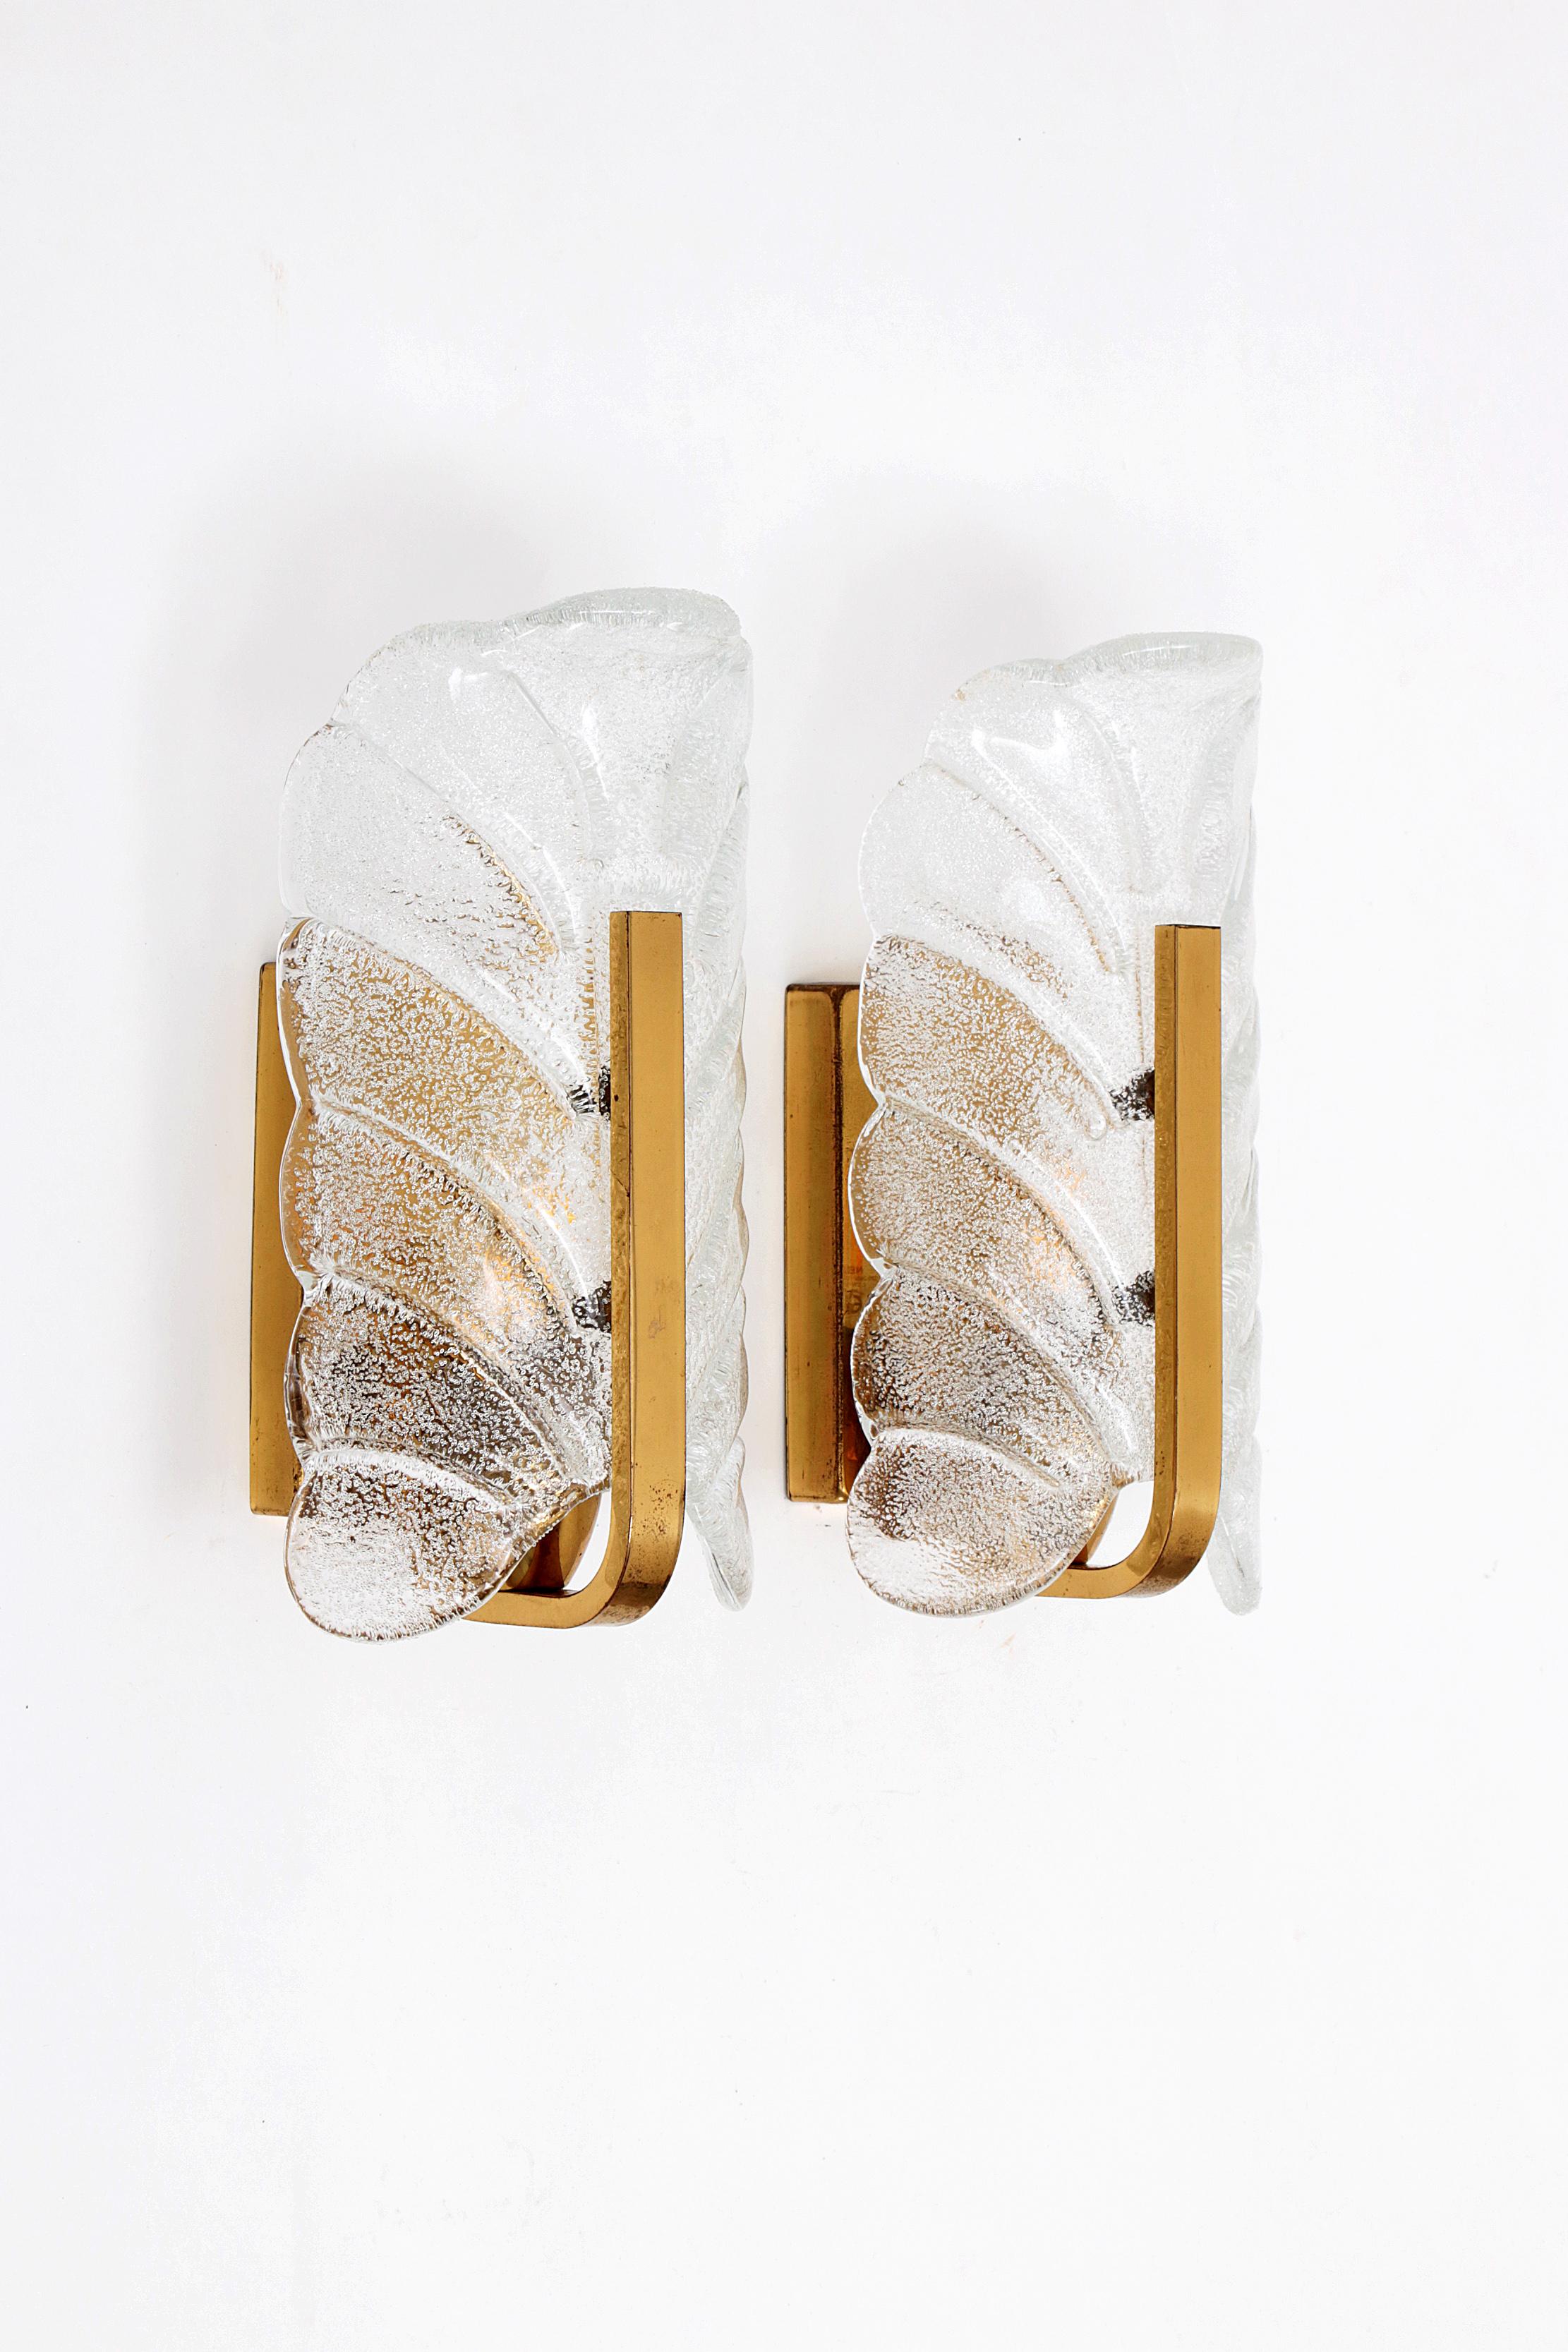 Pair of Scandinavian glass wall lamps/candlesticks by Carl Fagerlund for Orrefors (1960s). Clear glass shade representing a leaf (matte embossed on the inside and glossy on the outside) on polished brass. Spreads the light beautifully (see